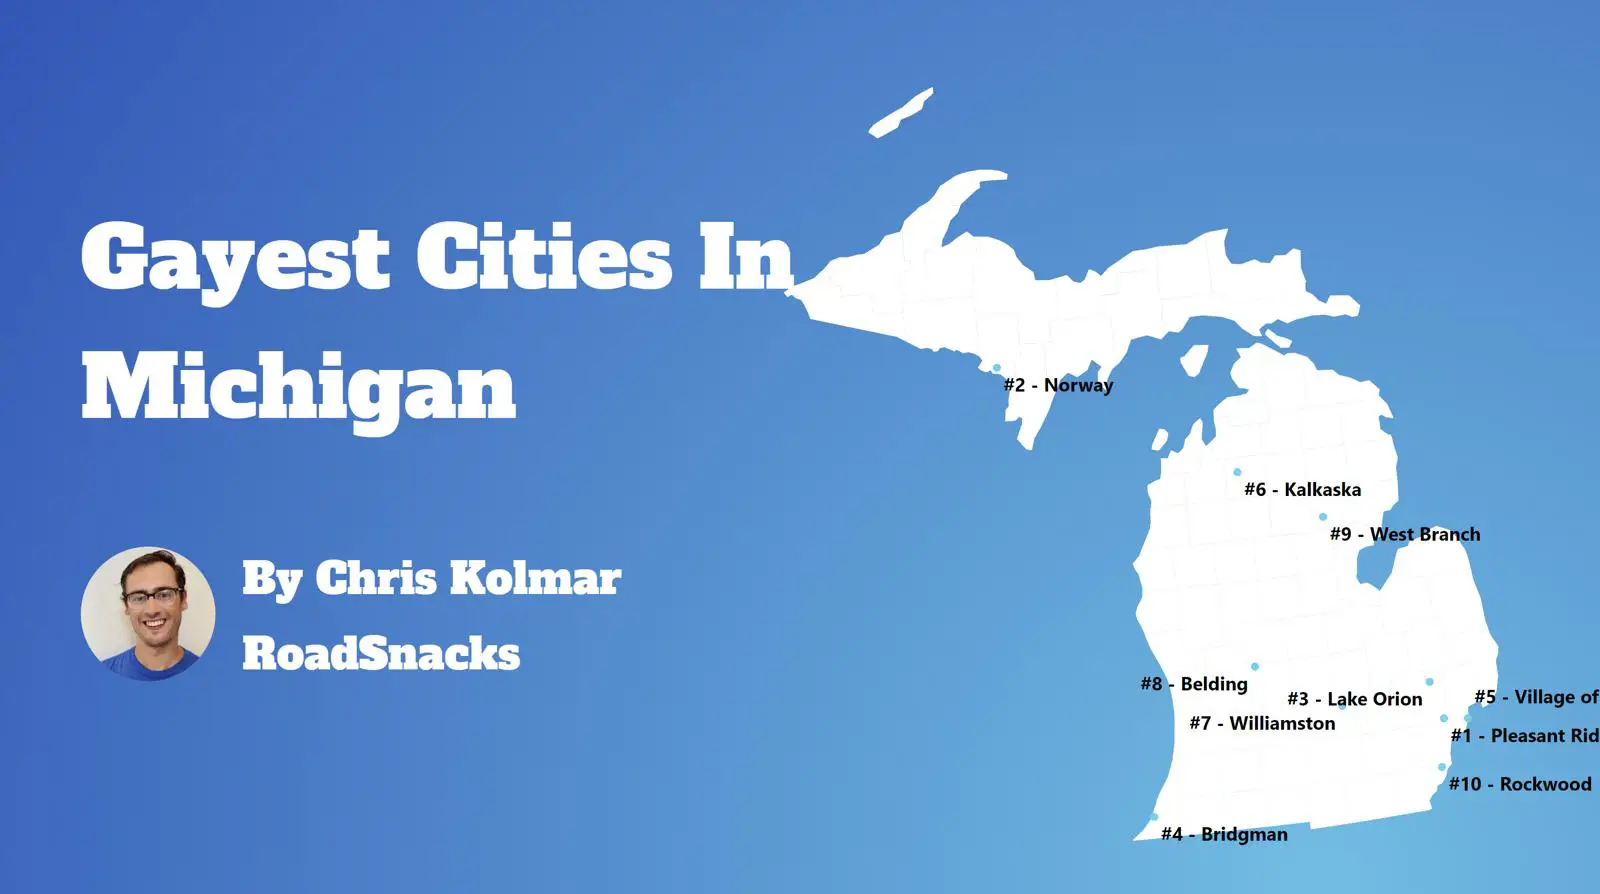 Gayest Cities In Michigan Map